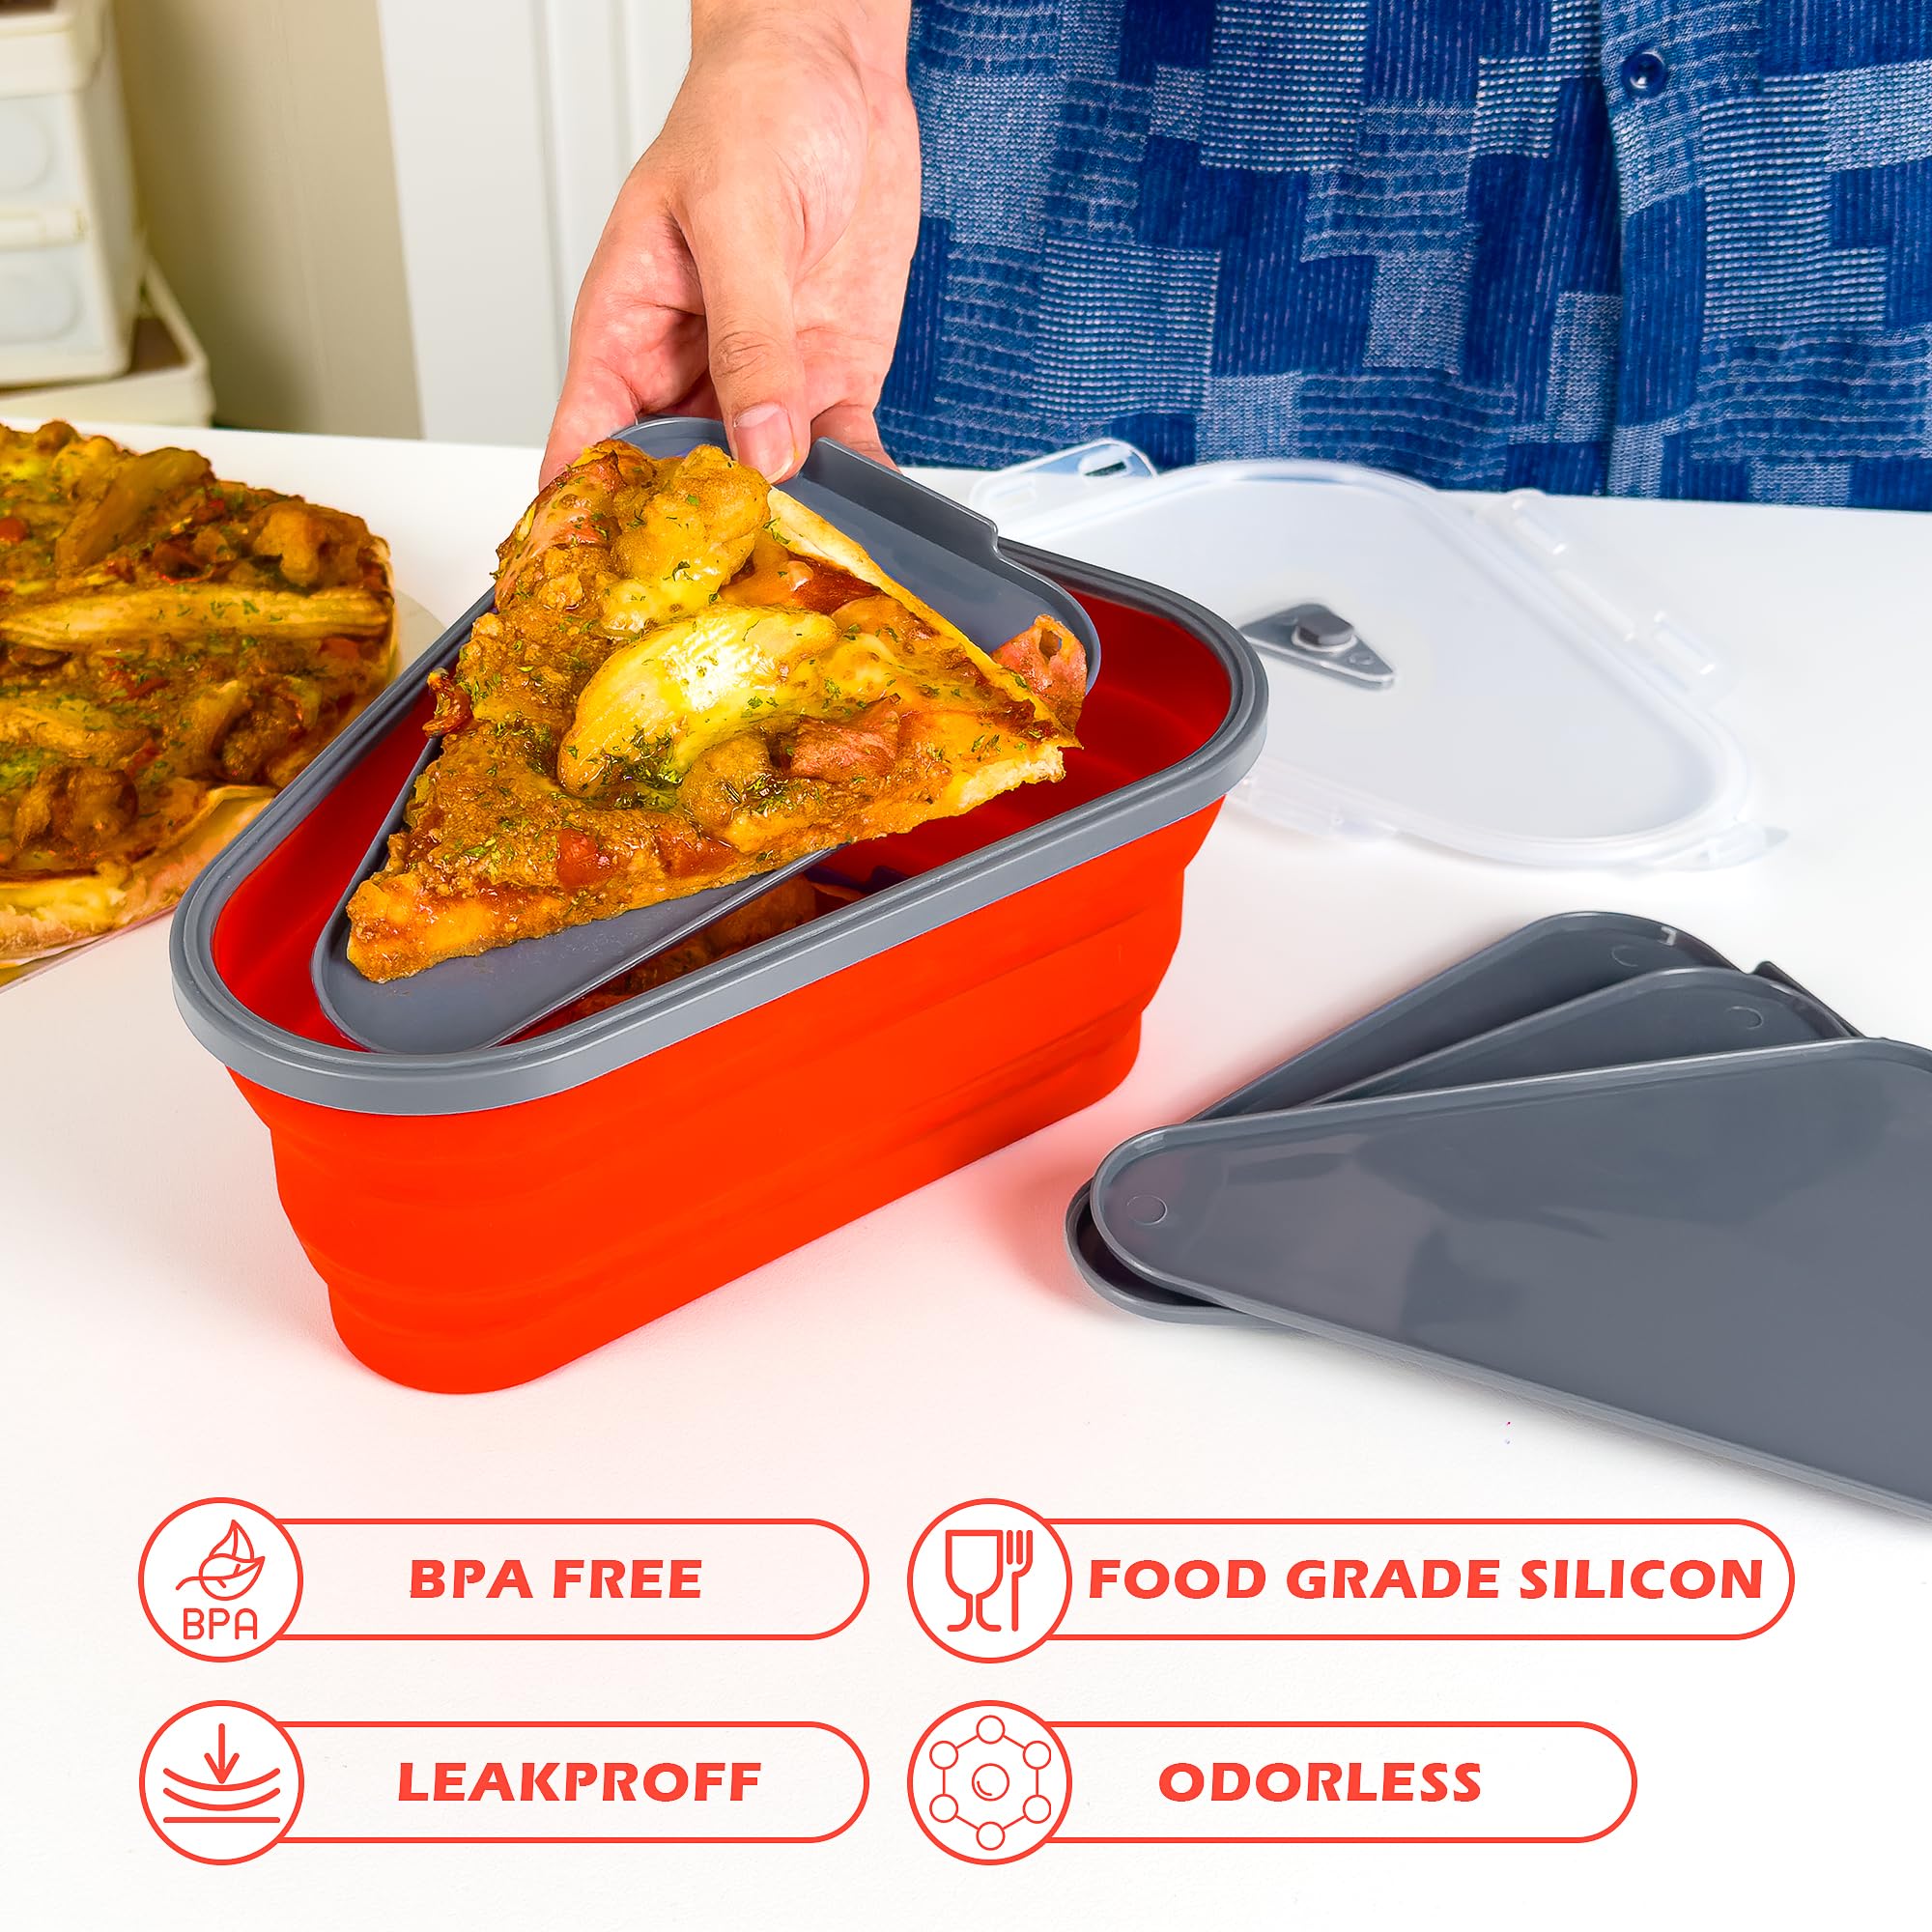 Pizza Storage Container with 5 Microwavable Serving Trays BeinCart